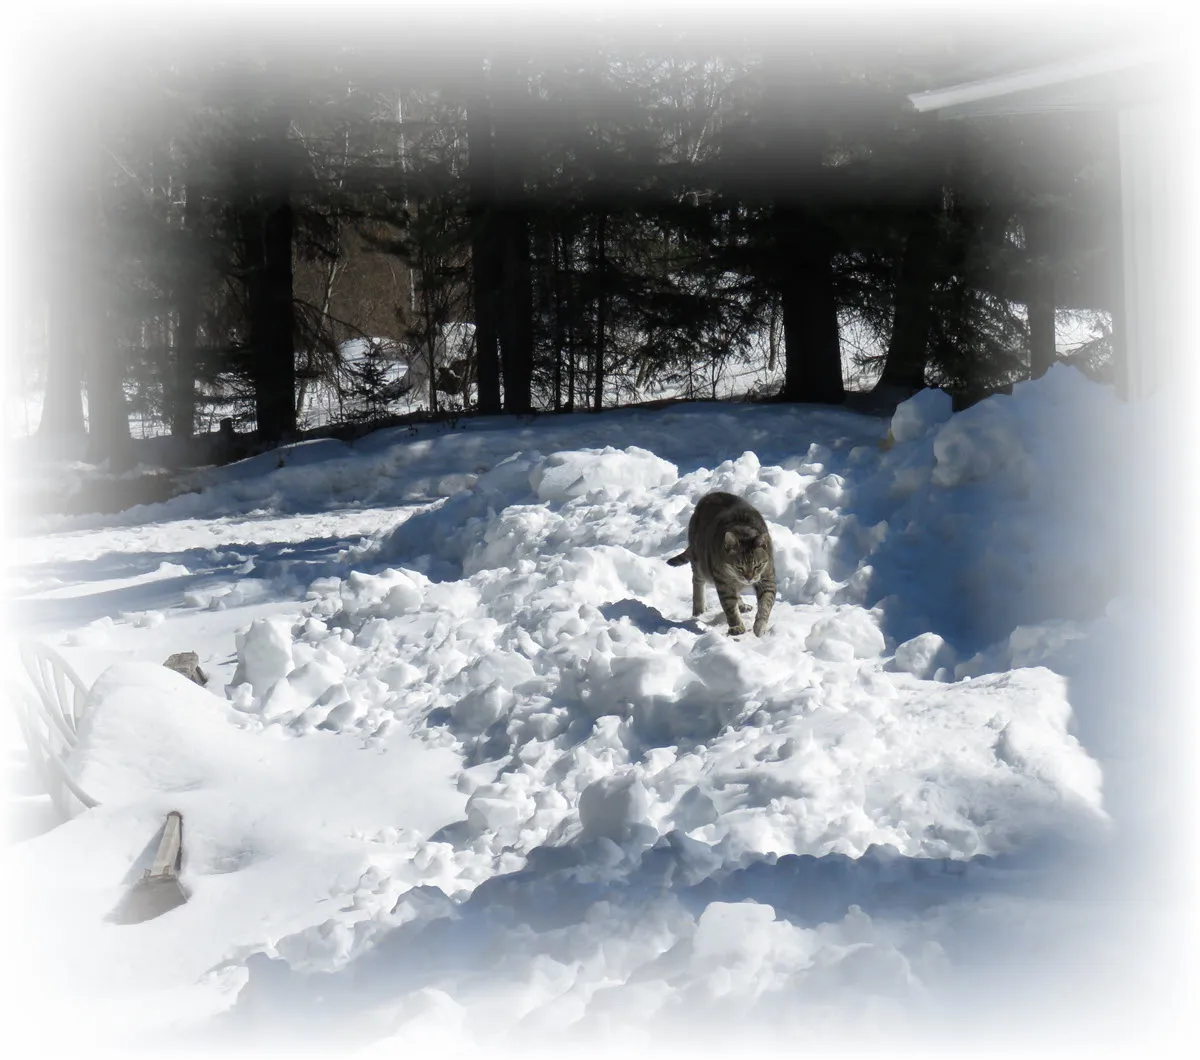 JJ walking over mound of snow from avalanche off garage.JPG